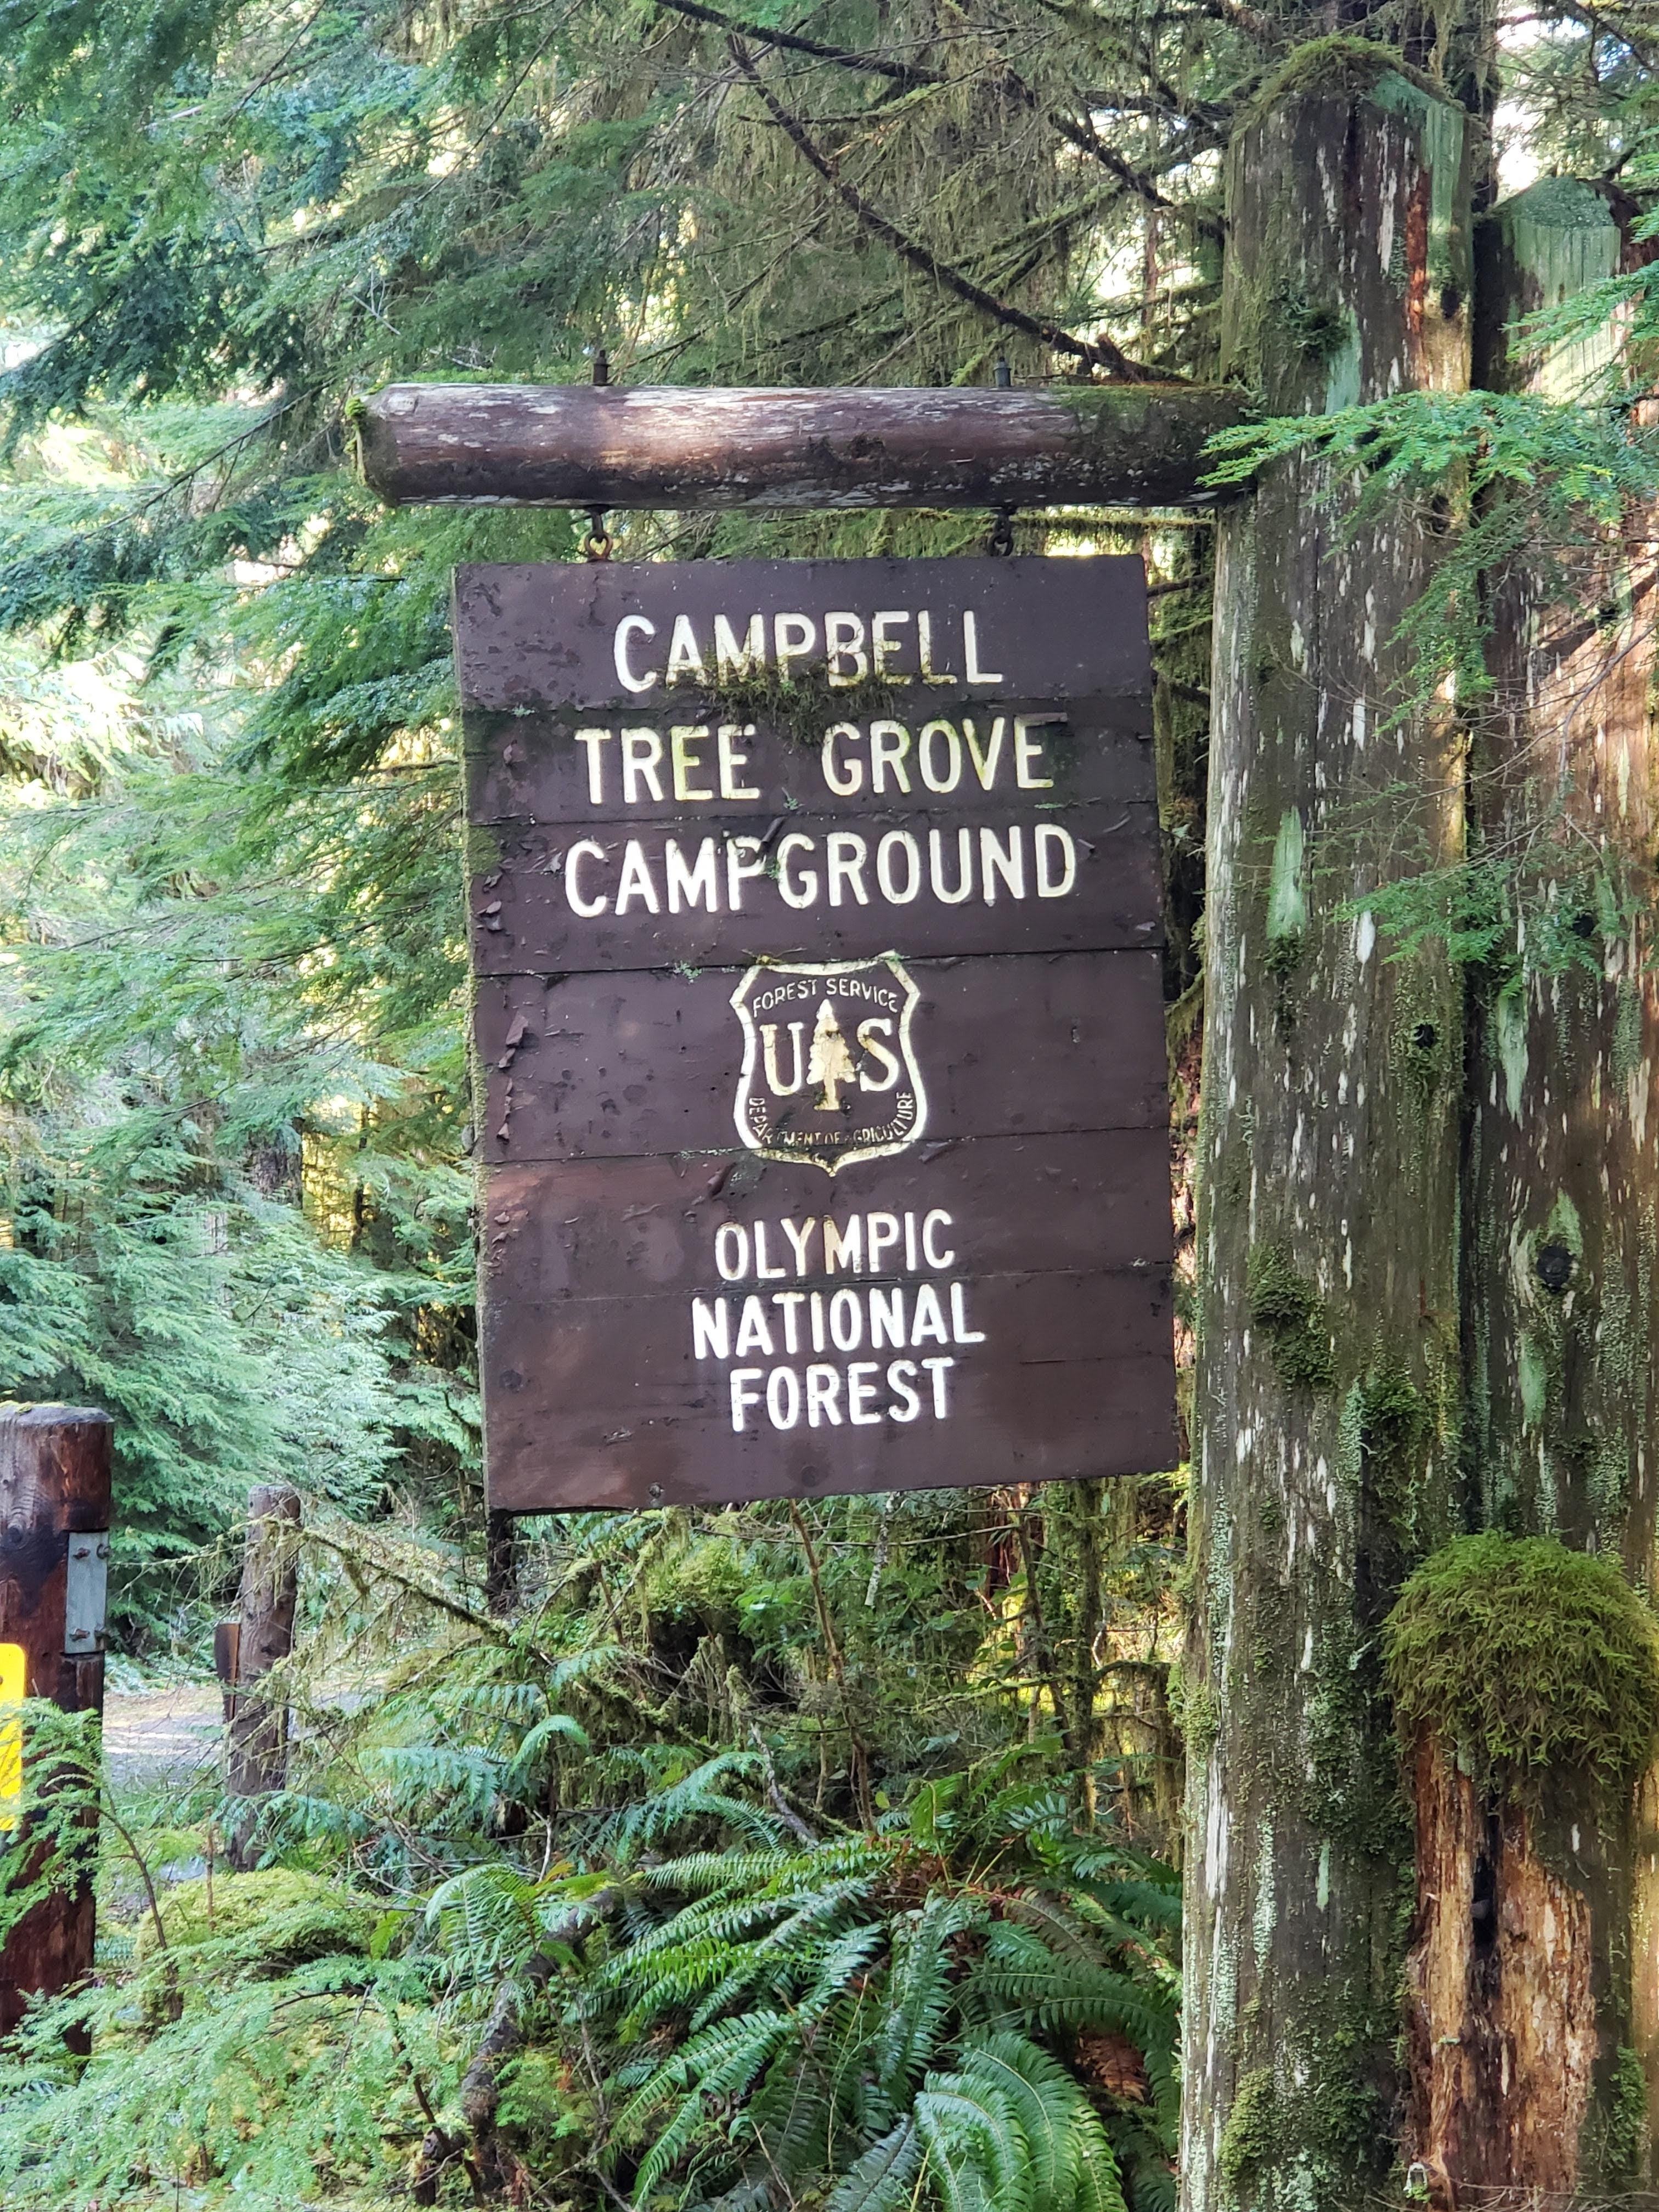 I have added all the photos from my recent trip to Campbell
Joe a